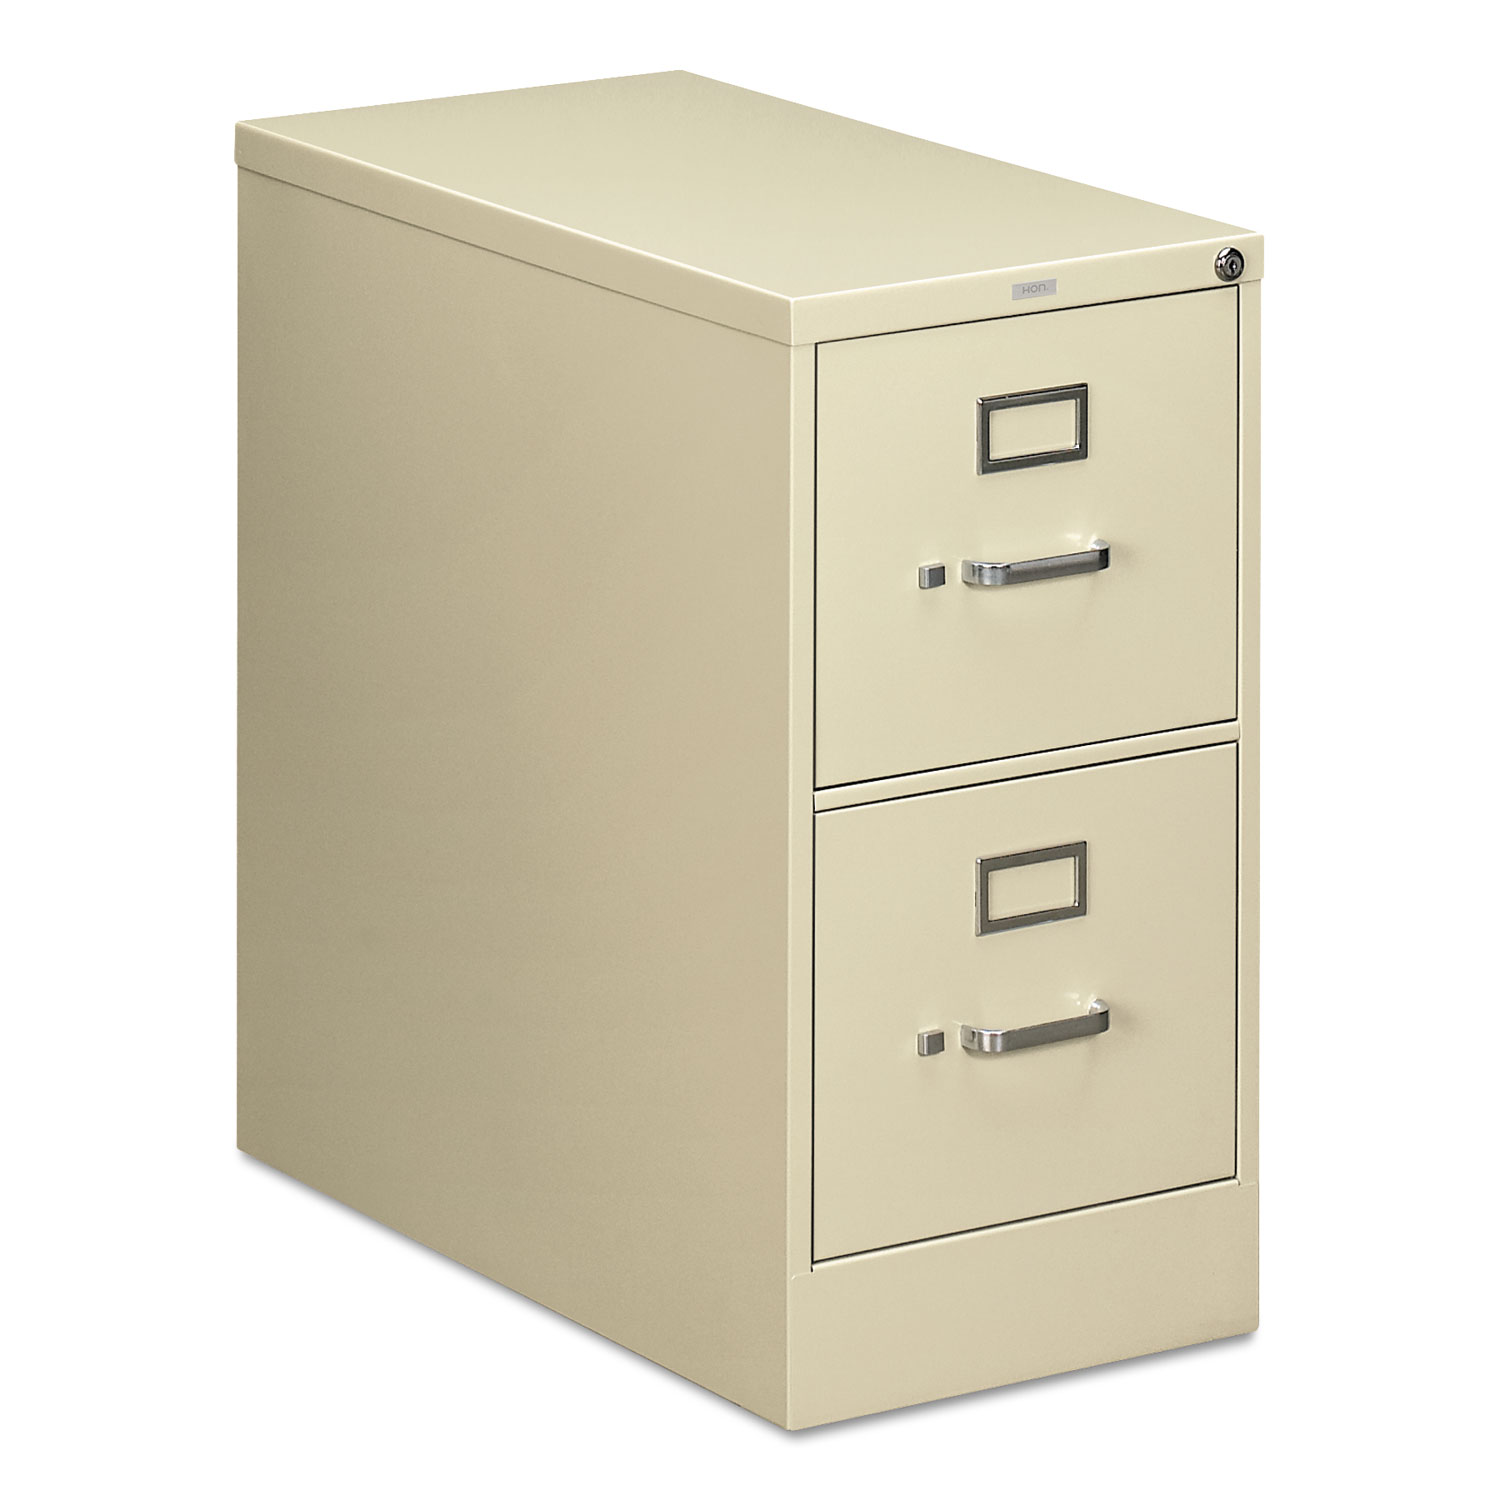 210 Series Two-Drawer, Full-Suspension File, Letter, 28-1/2d, Putty